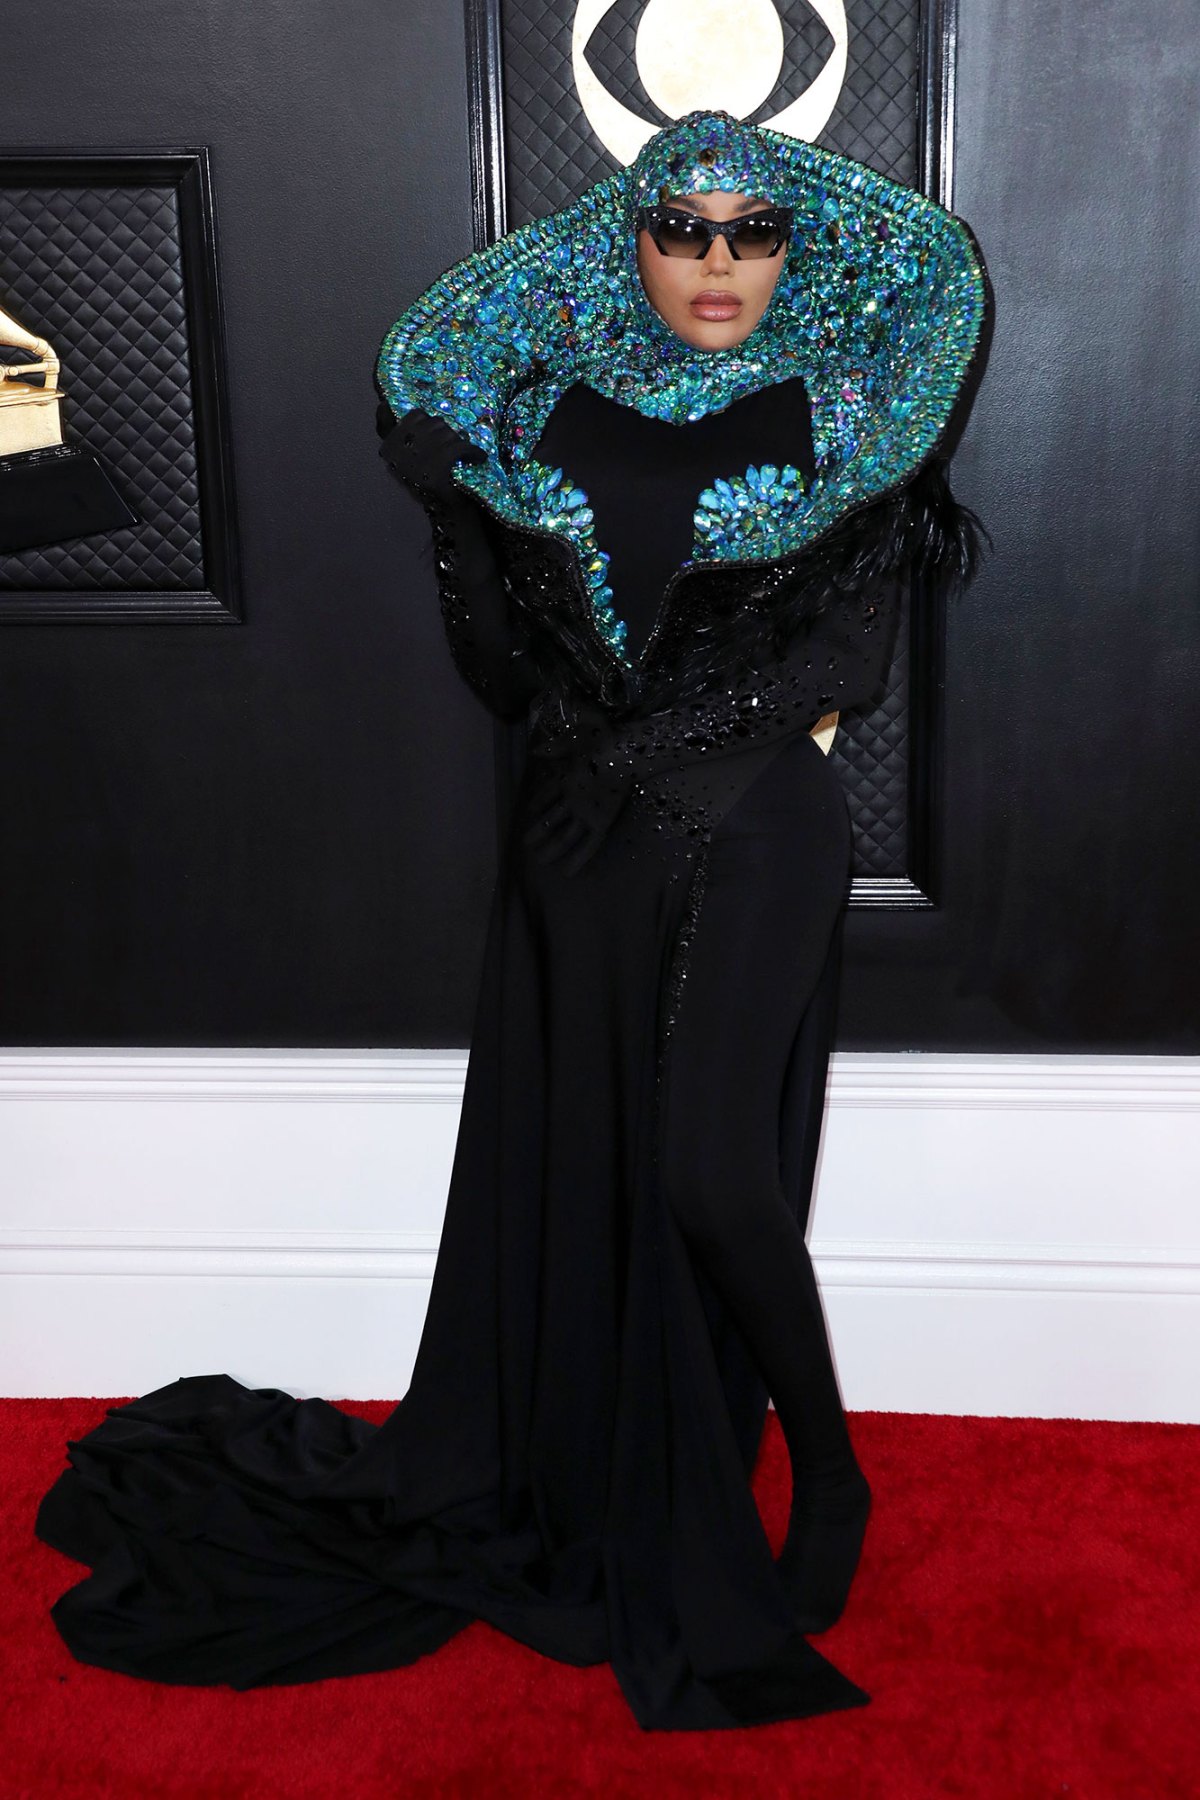 Wild-and-wacky Grammys red carpet does Las Vegas proud